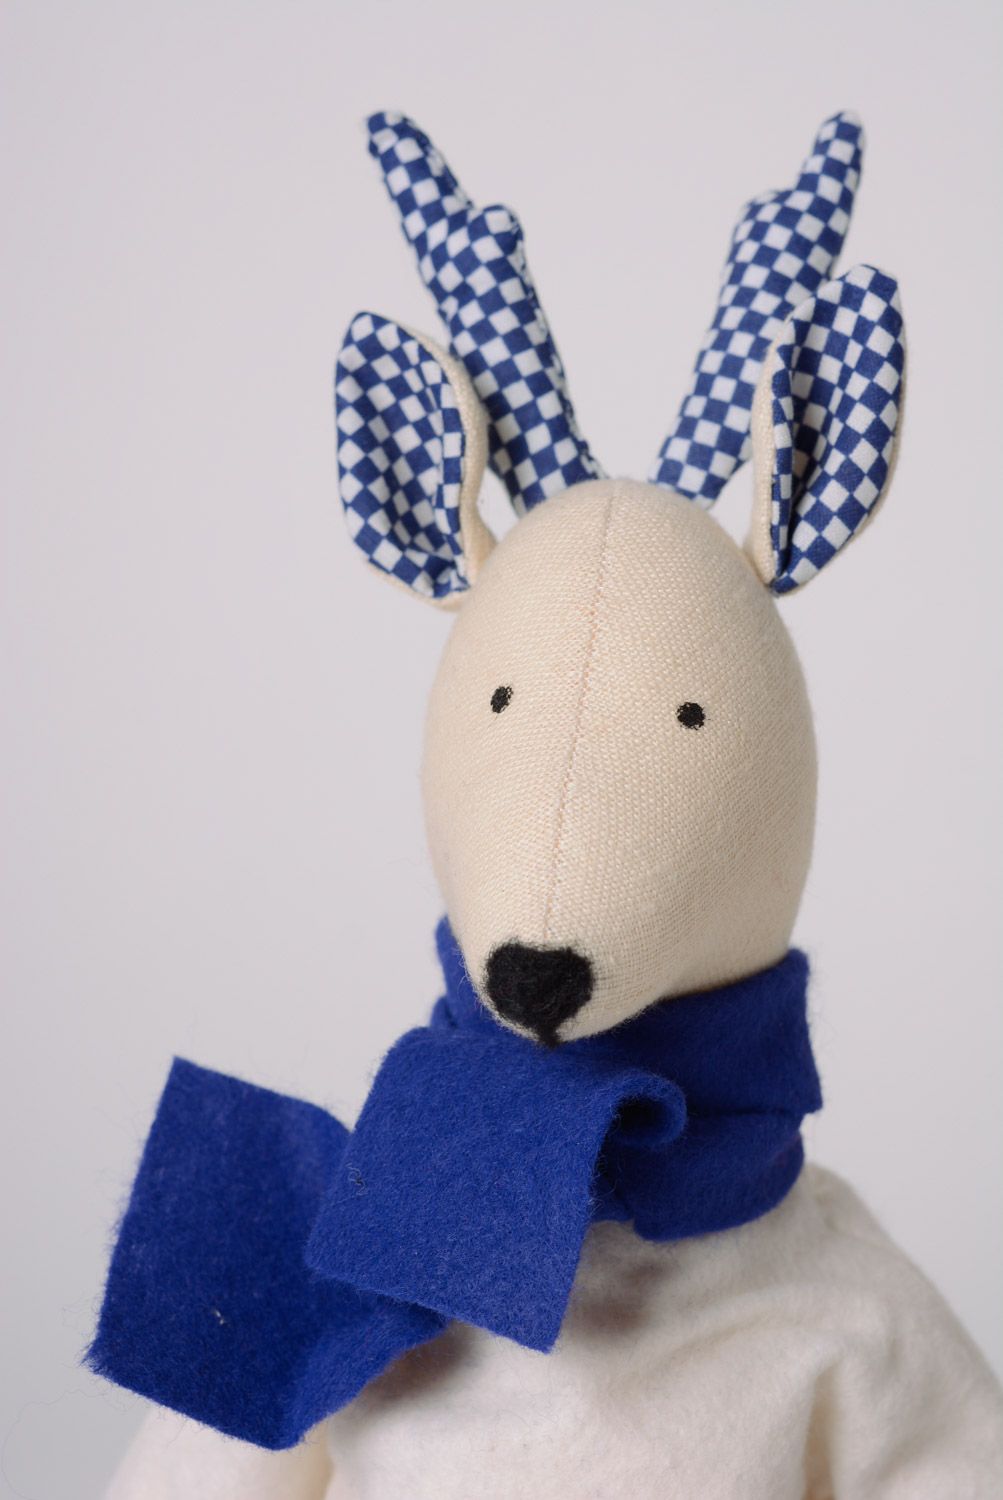 Homemade fabric soft toy elk for home decor children's gift photo 2